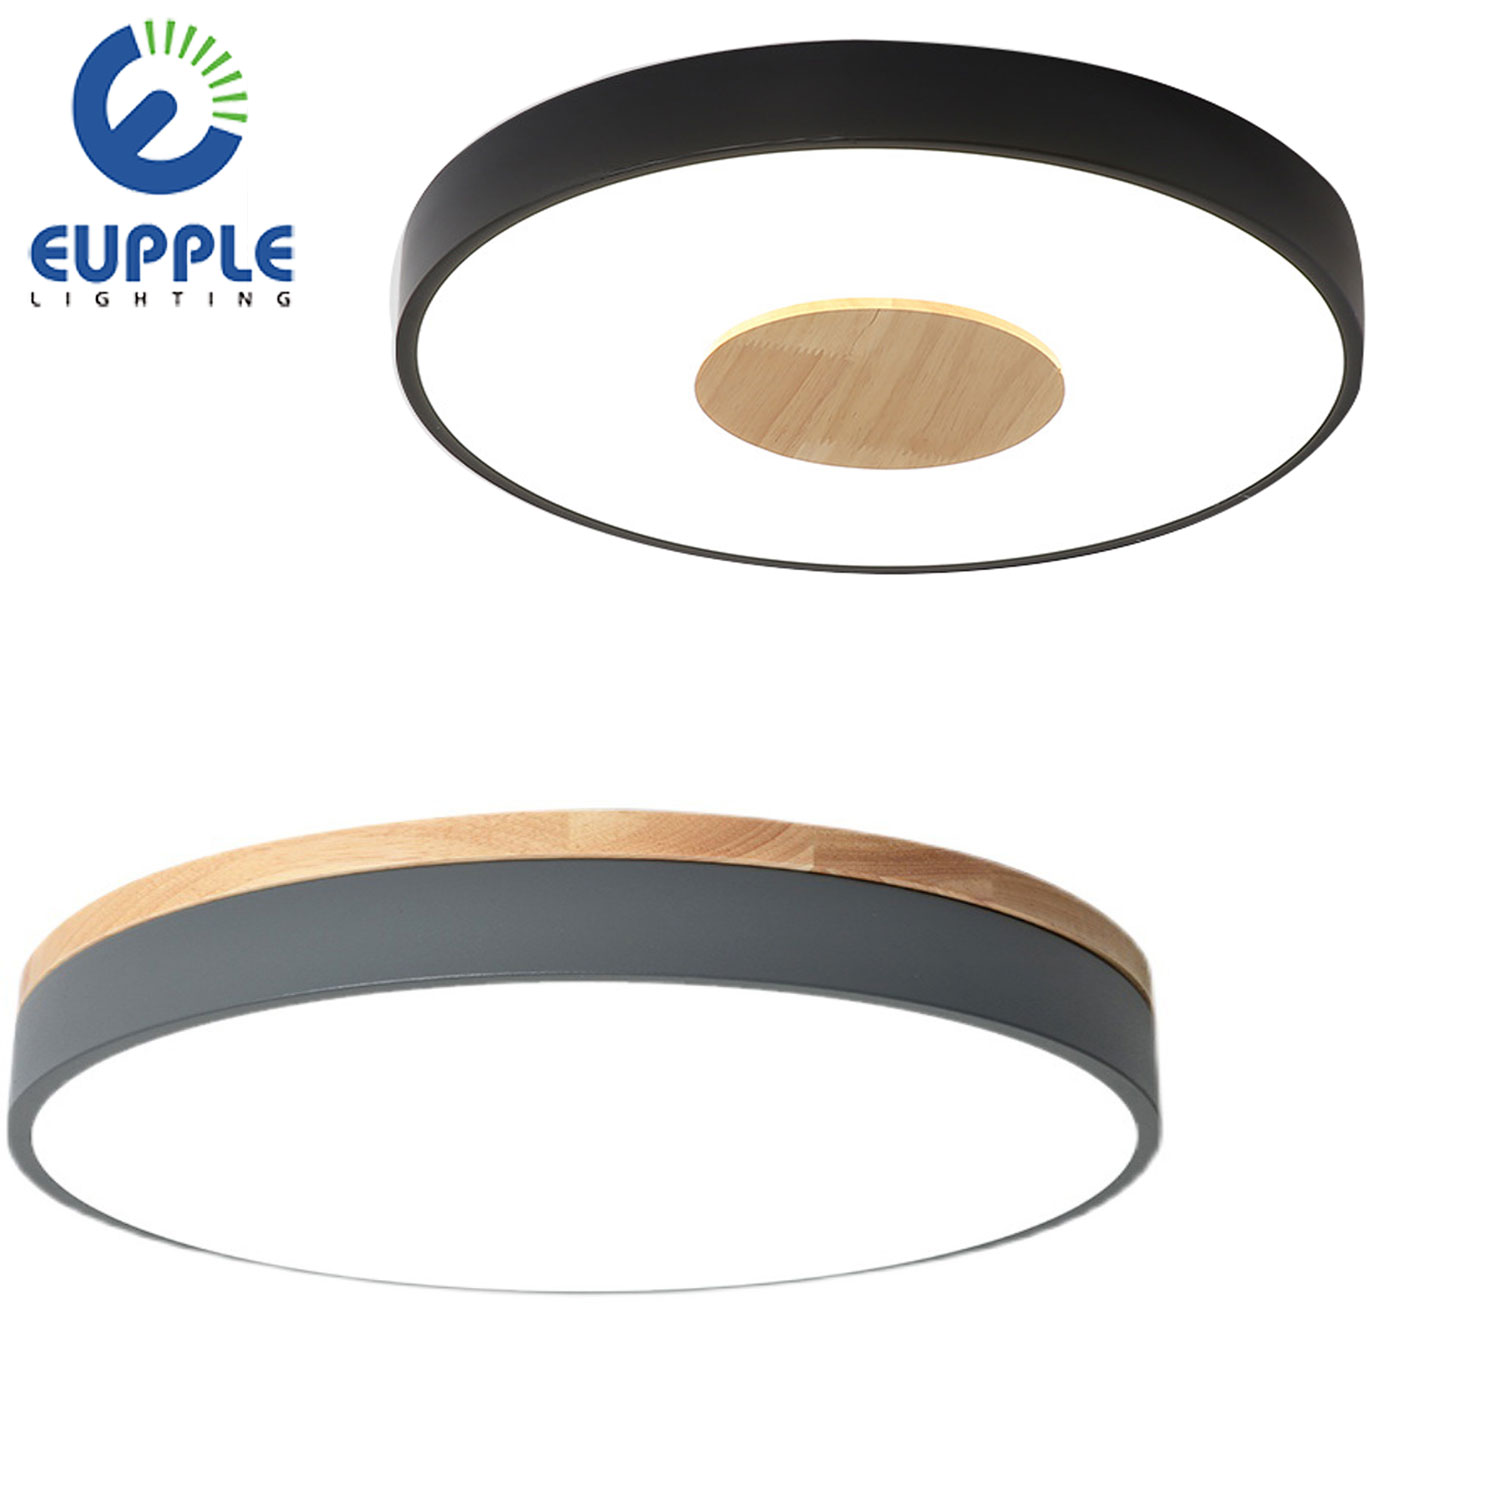  hot sales Ultra-thin slim round led LED Deckenlampe for home bedroom